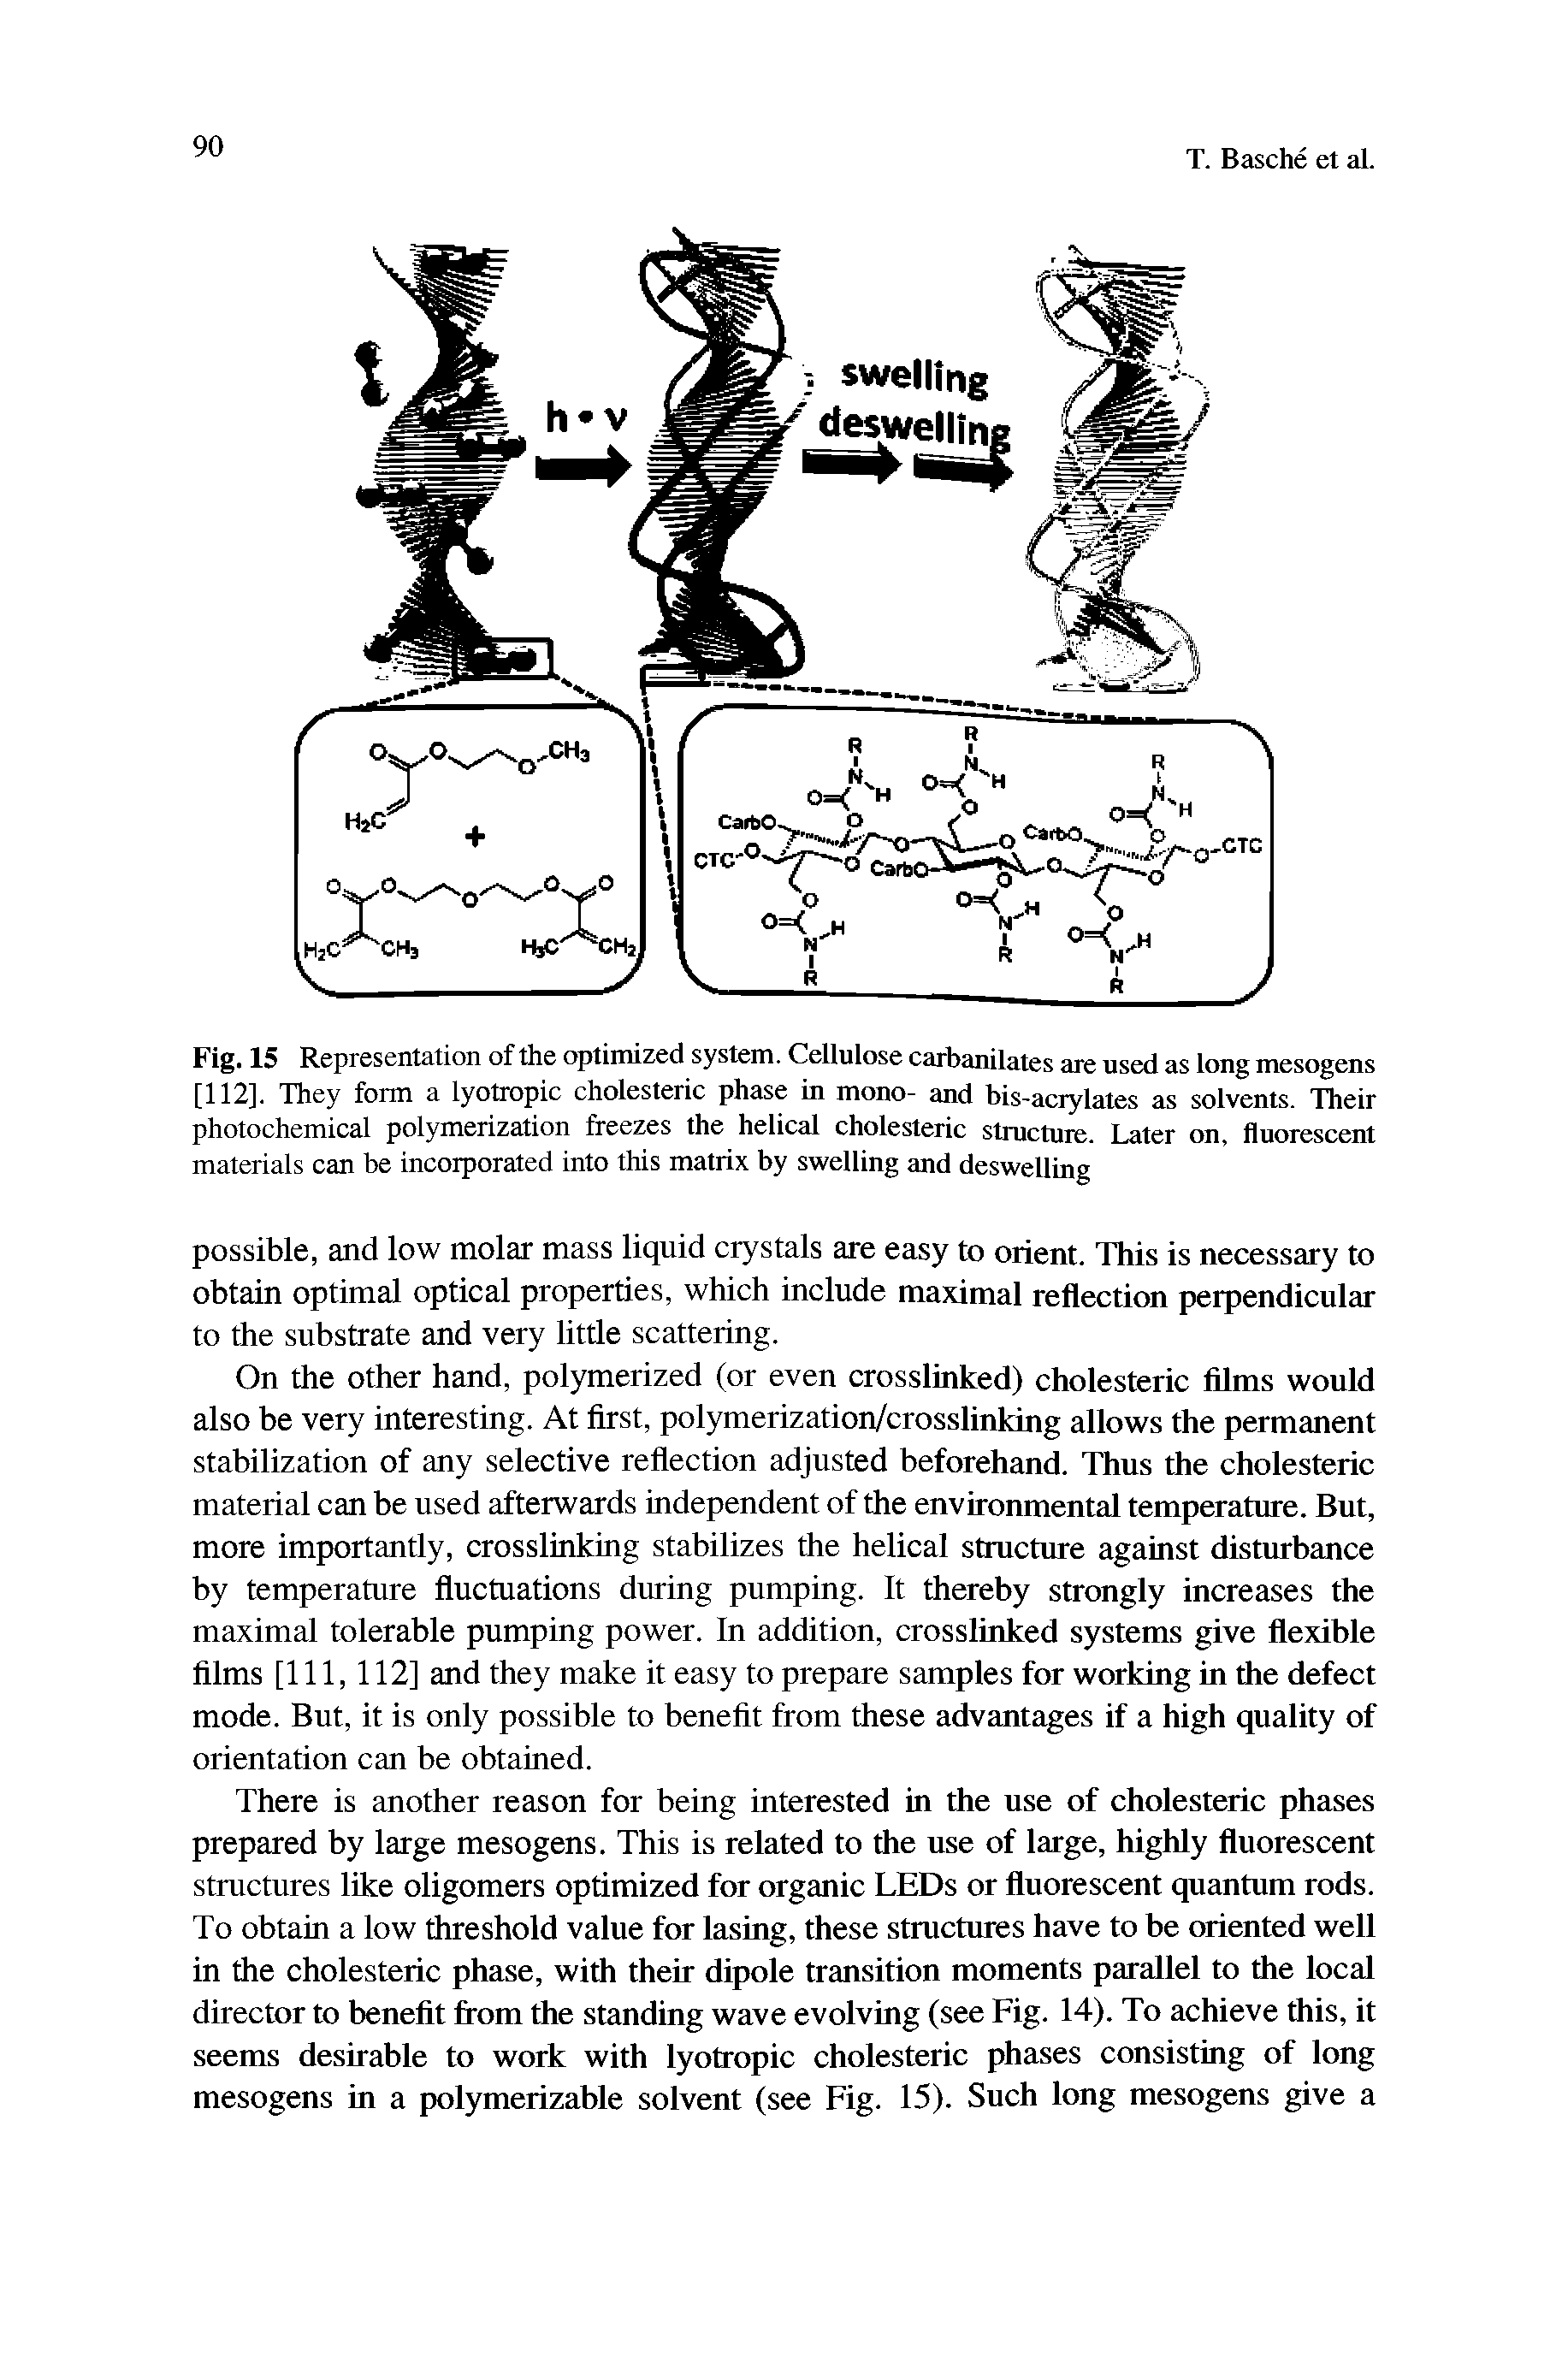 Fig. 15 Representation of the optimized system. Cellulose caihanilates are used as long mesogens [112], They form a lyotropic cholesteric phase in mono- and bis-aaylales as solvents. Their photochemical polymerization freezes the helical cholesteric structure. Later on, fluorescent materials can be incorporated into this matrix by swelling and deswelling...